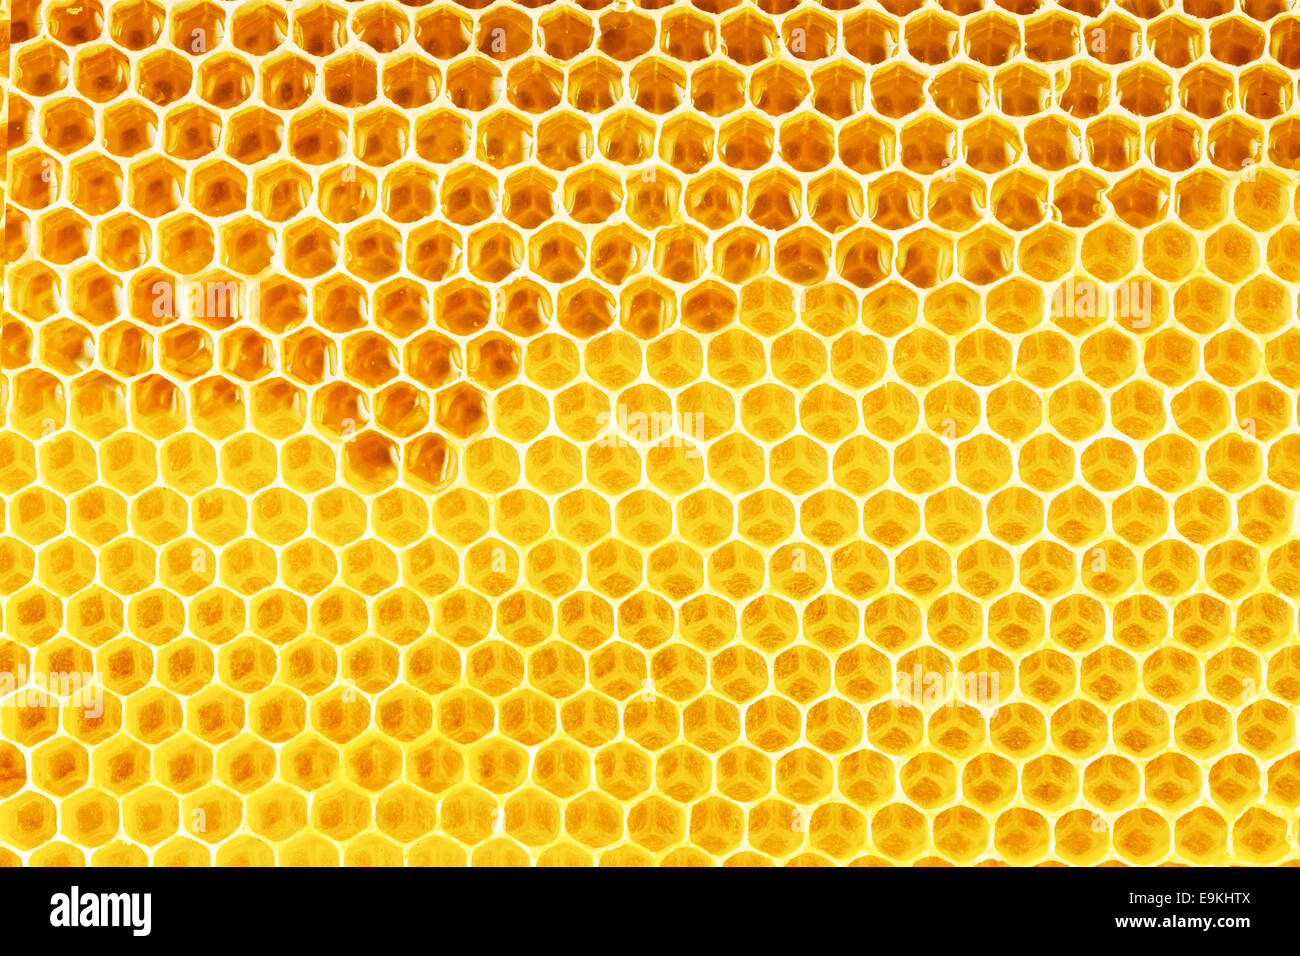 natural honey in honeycomb background Stock Photo